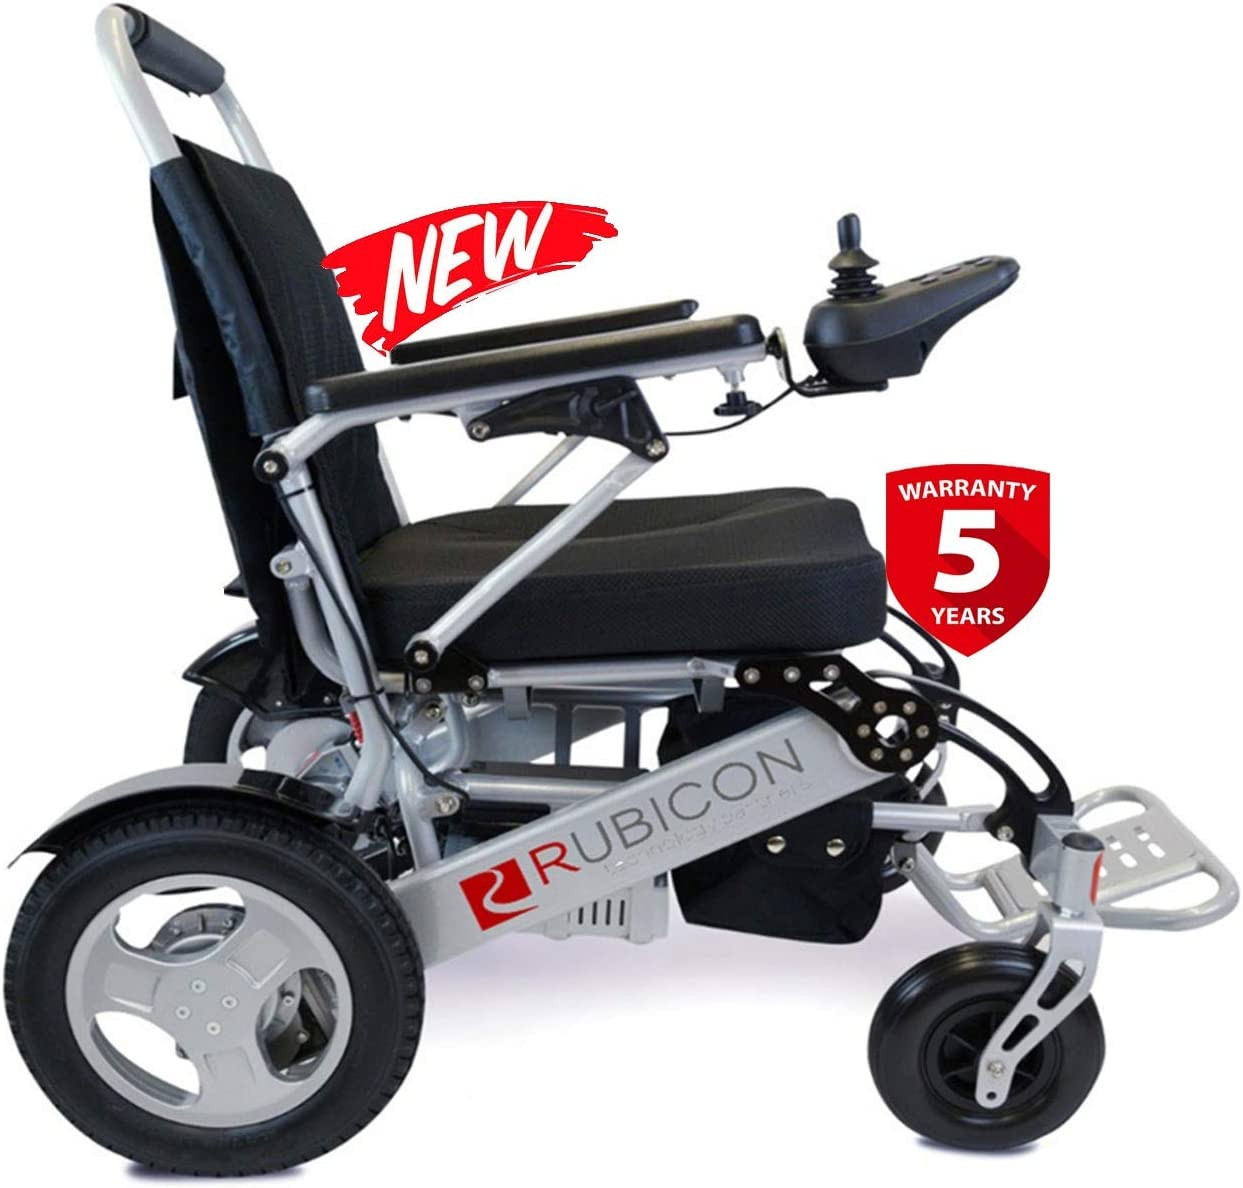 All Terrain Rubicon DX12 Electric Wheelchairs for Adults